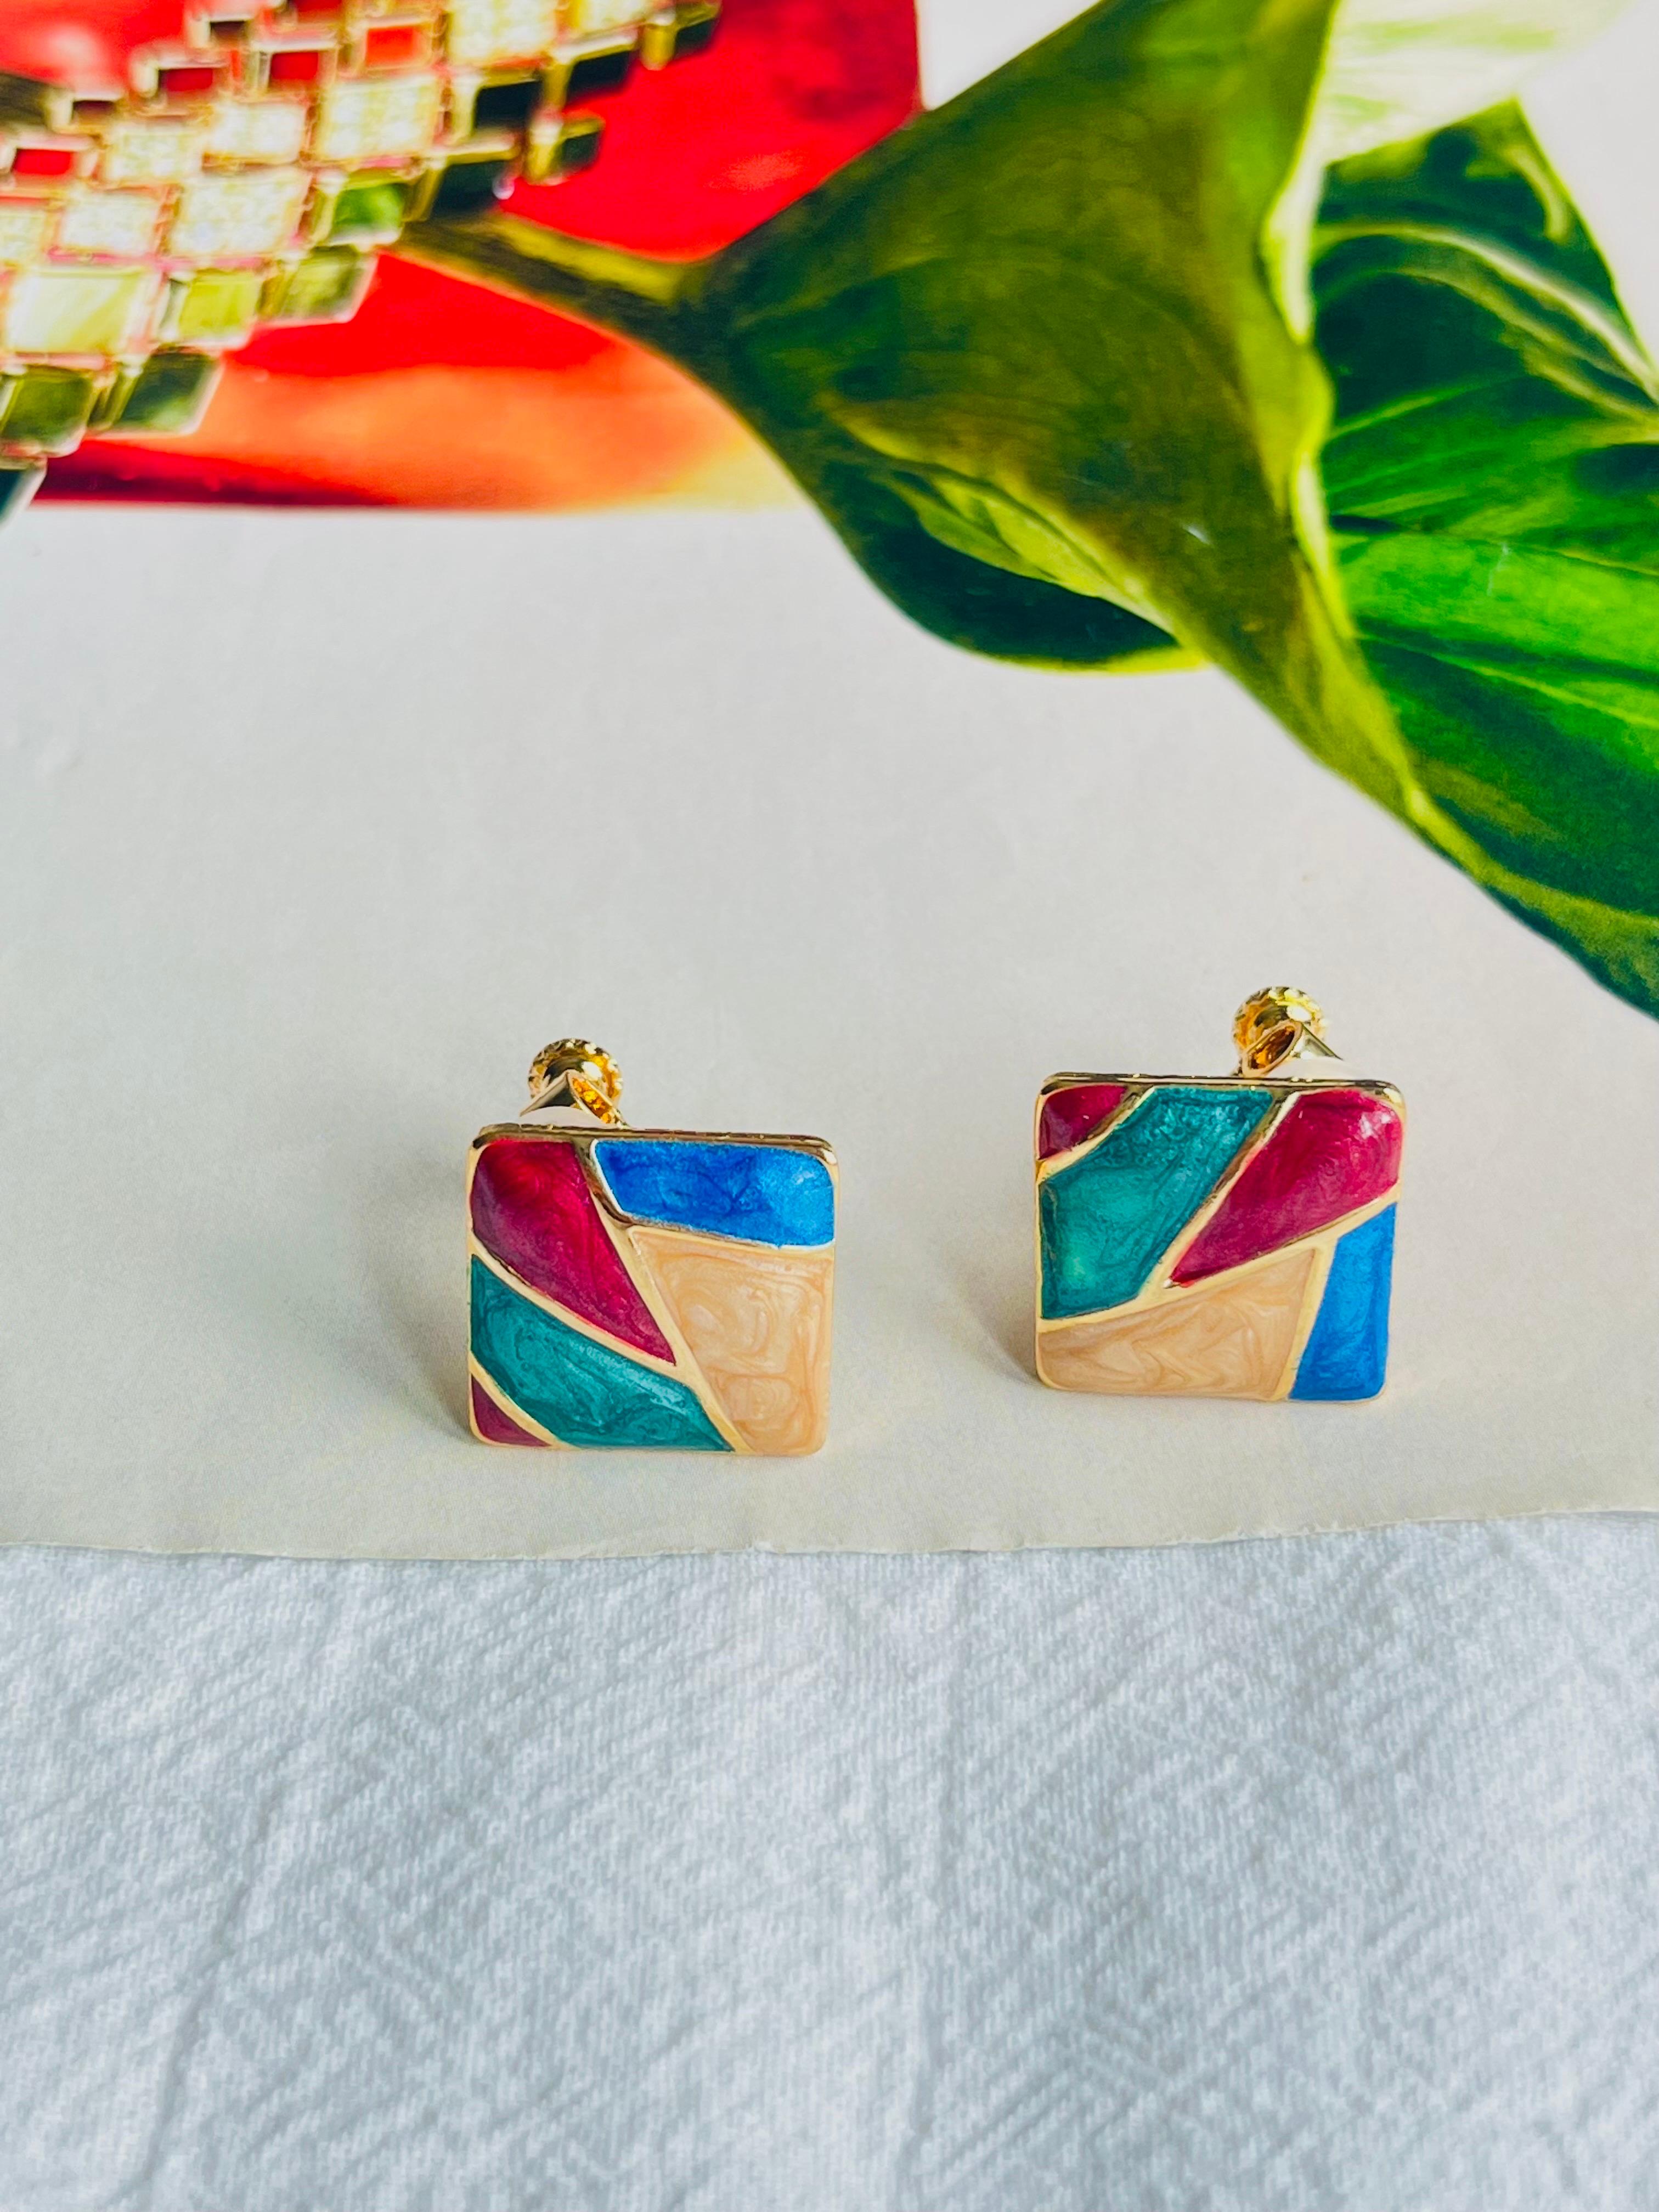 Glow Black Enamel Fan Geometric Elegant Modernist Clip Earrings, Gold Tone, Swarovski Element

The cost is very high. 100% handmade. Excellent gift for lady. Fine handcraft.

Material: Enamel, Gold Plated Metal.

Size: 2.8*1.5 cm.

Weight: 5